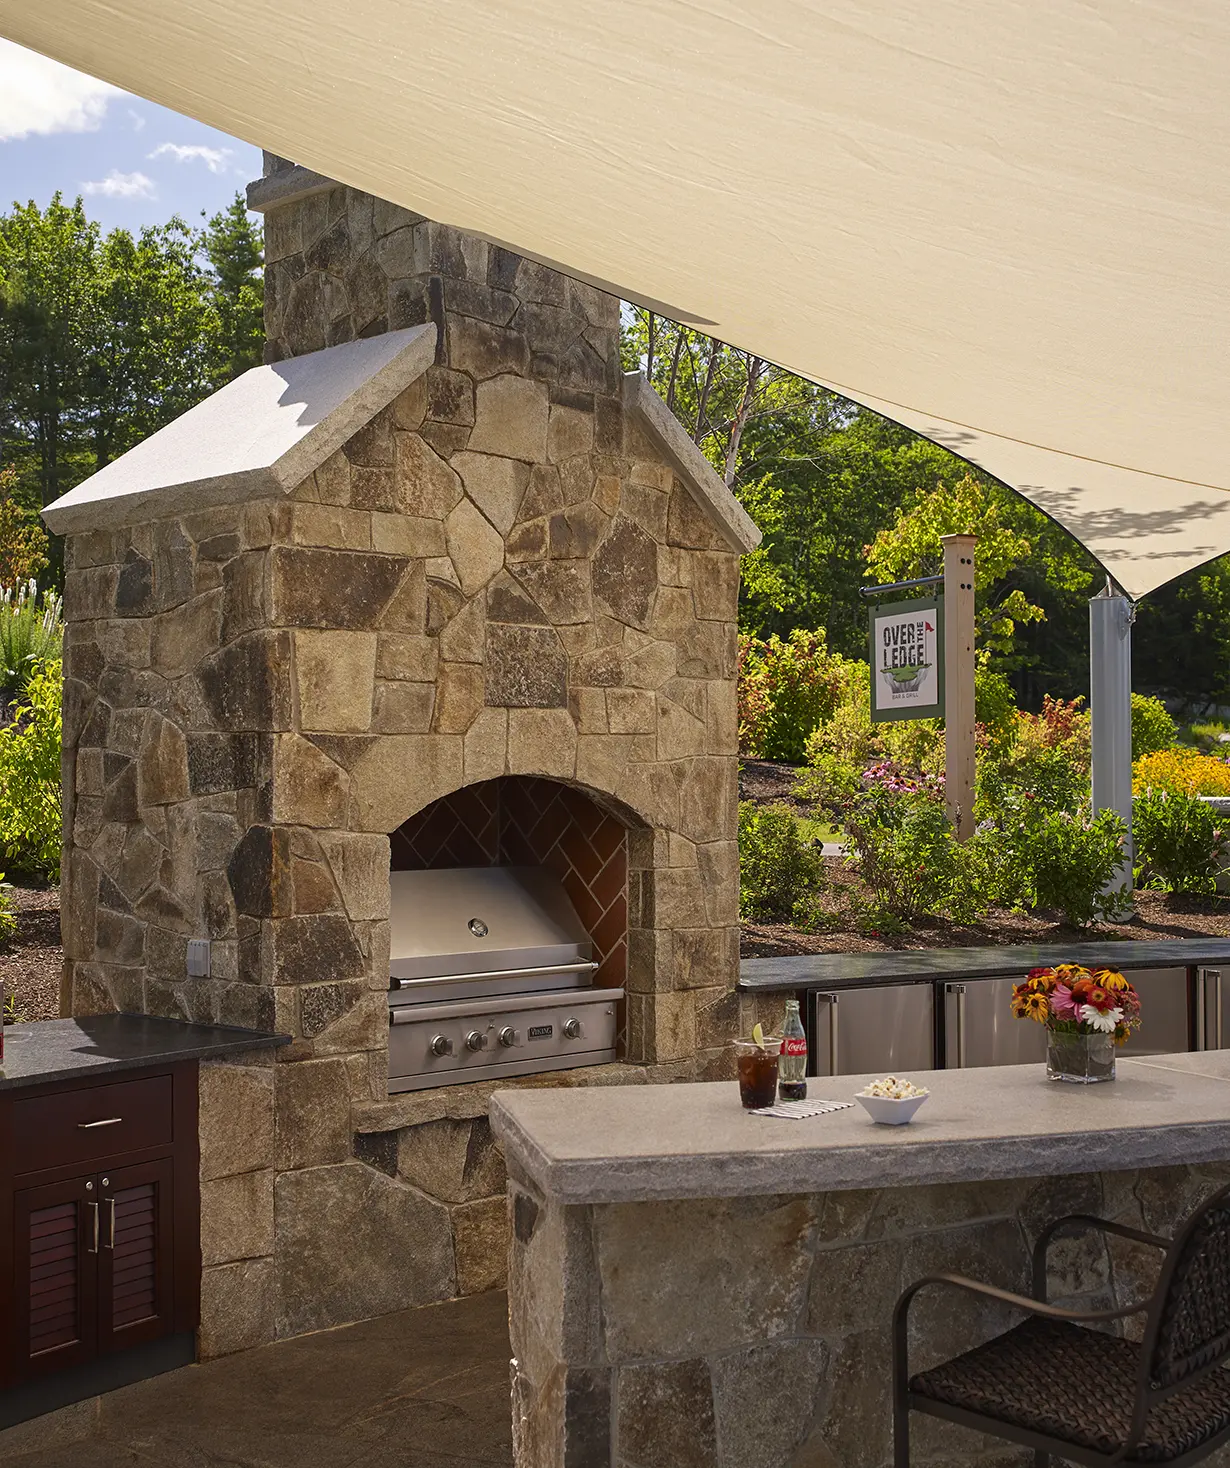 Side view of outdoor kitchen